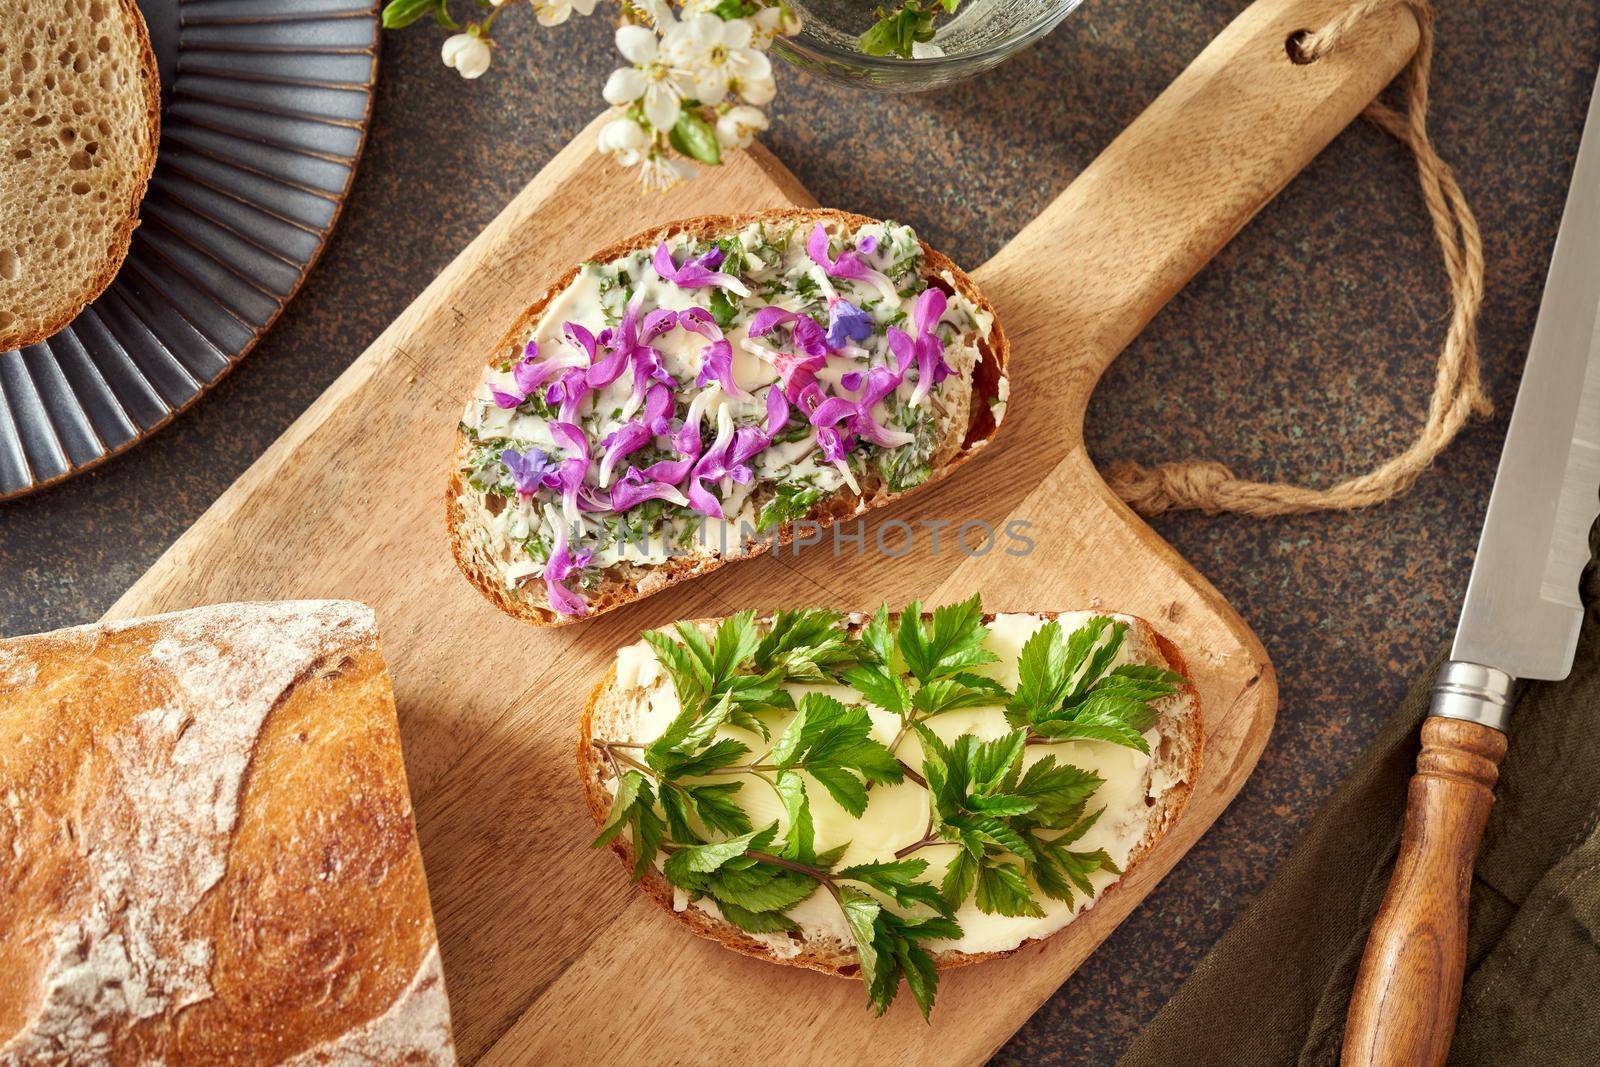 Two slices of bread with wild edible spring plants - young goutweed leaves, purple dead-nettle and lungwort blossoms by madeleine_steinbach